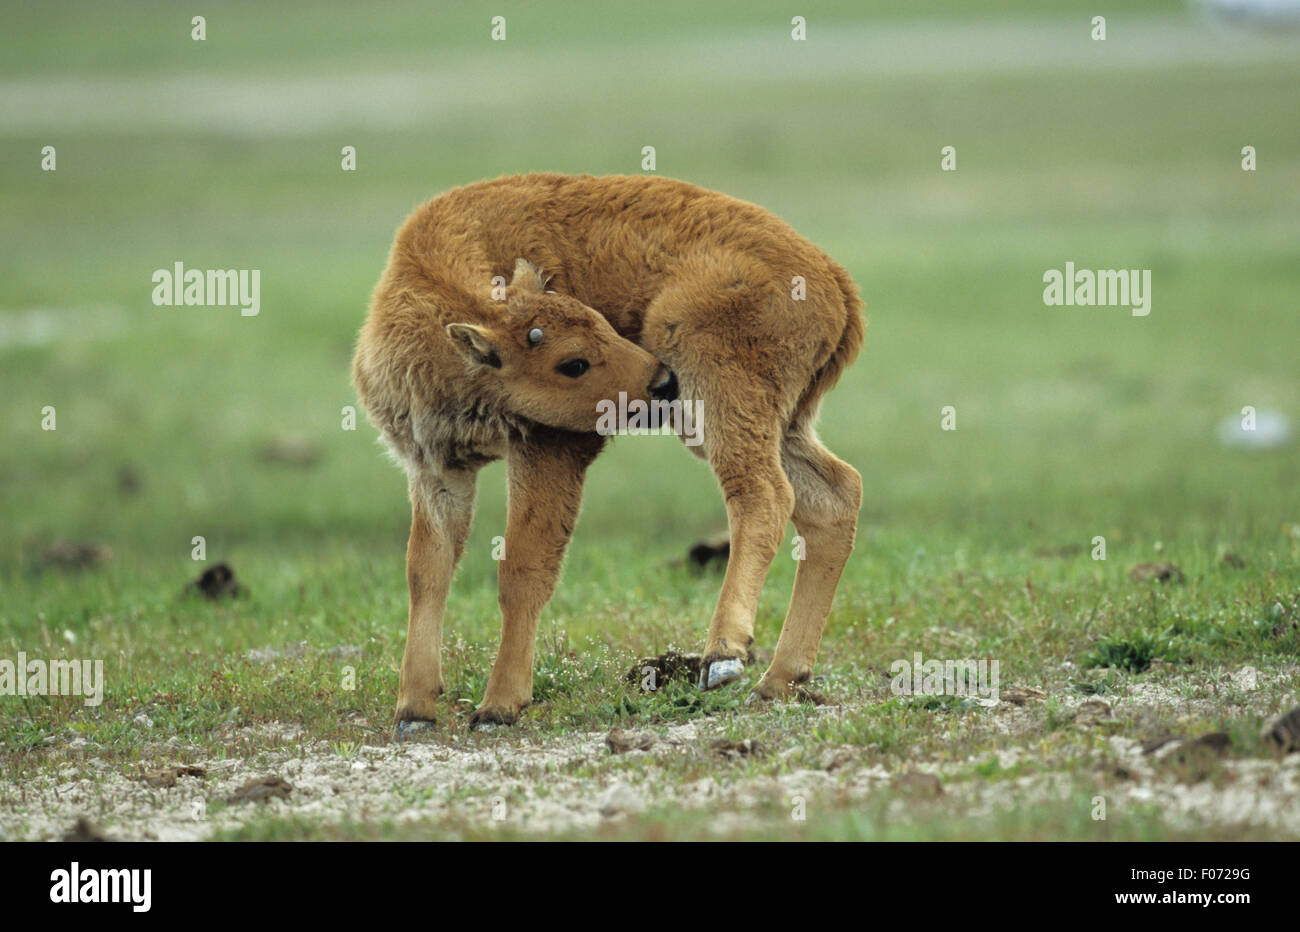 Bison young calf taken in profile head back to right licking back leg standing on open grassland Stock Photo